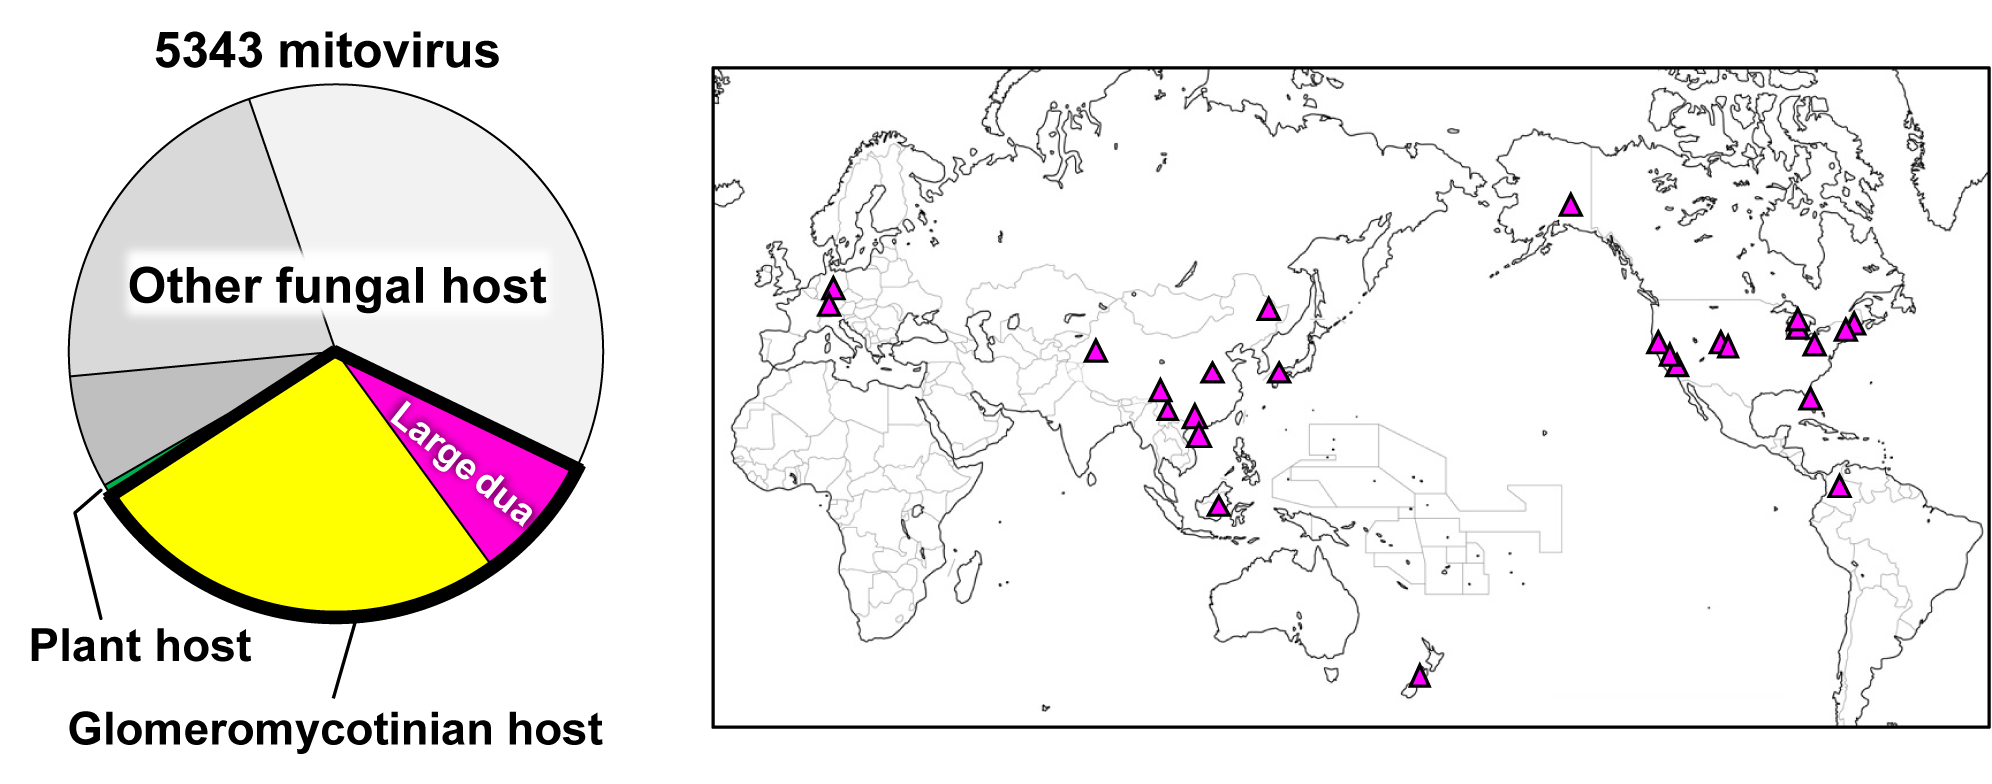 Large duamitoviruses consist of 23% of the glomeromycotinian mitoviruses (left) that are about one-third of the 5,343 mitoviruses detected in the soil samples collected worldwide. Sampling sites from which large duamitoviruses were detected are mapped (triangles, right). (Tatsuhiro Ezawa).